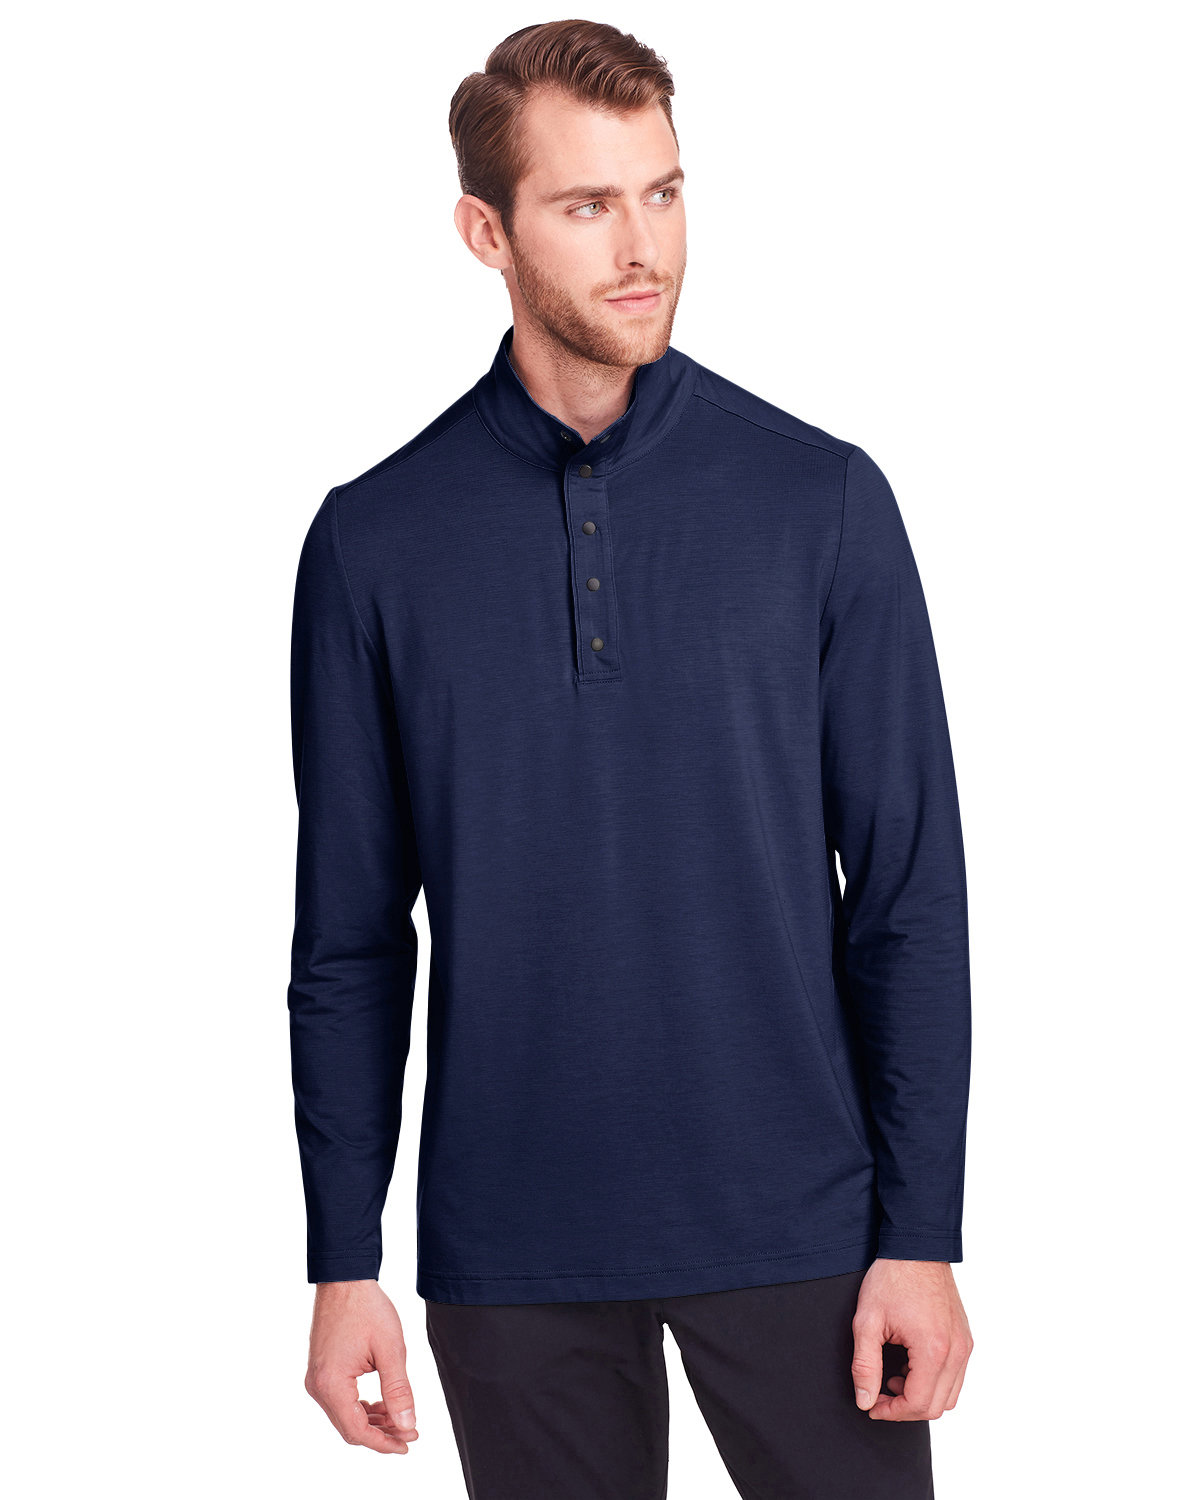 North End Men's Jaq Snap-Up Stretch Performance Pullover CLASSIC NAVY 